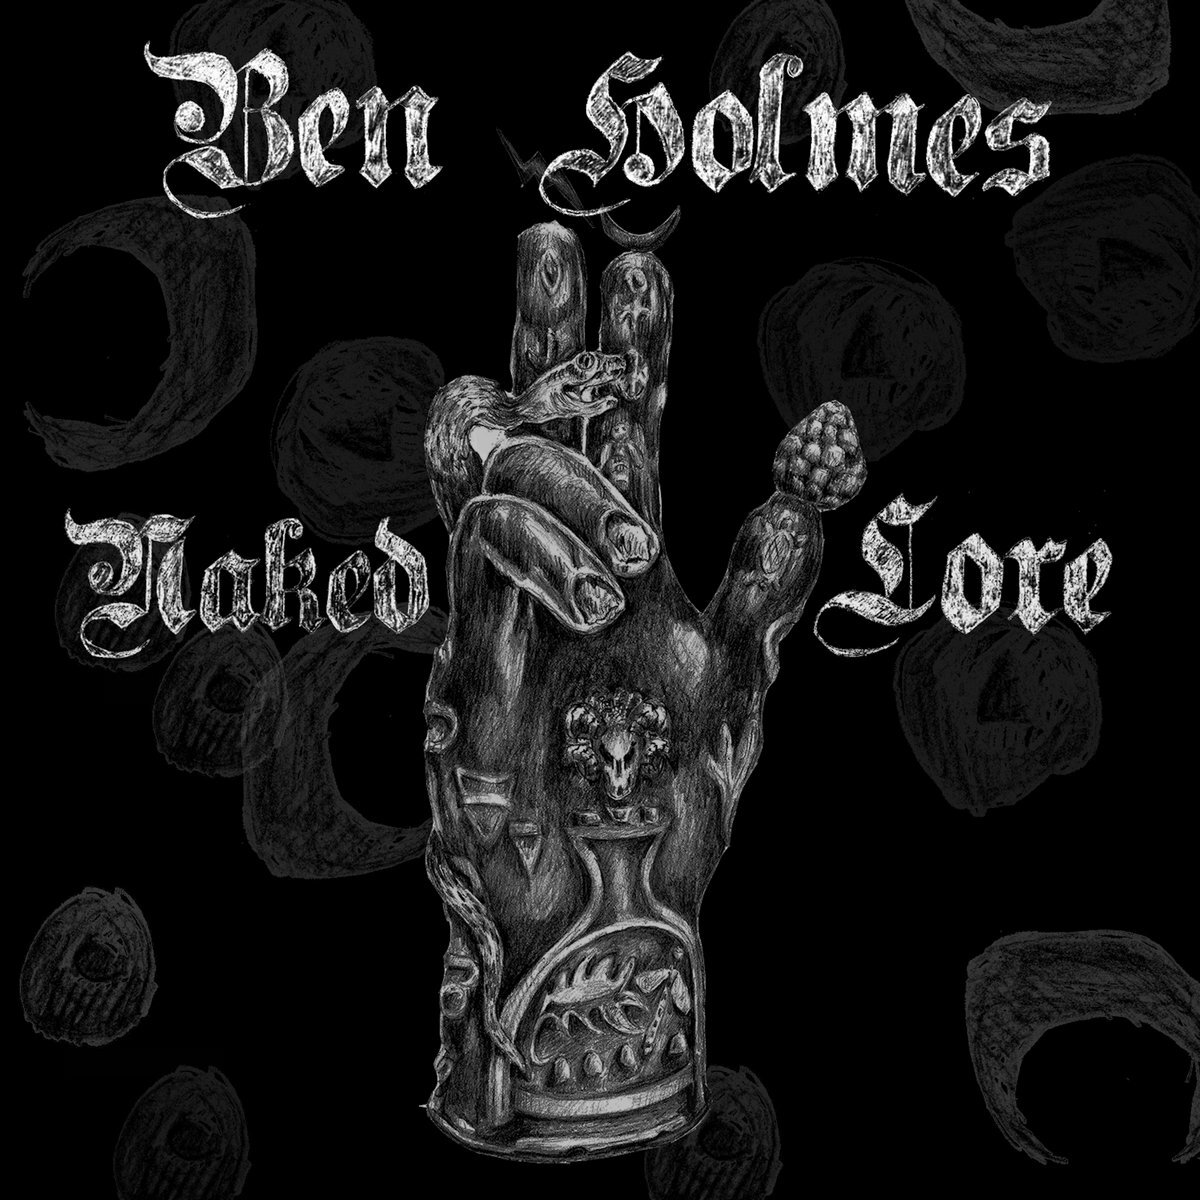 Ben Holmes - 'Naked Lore' (Chant Records, 2020)